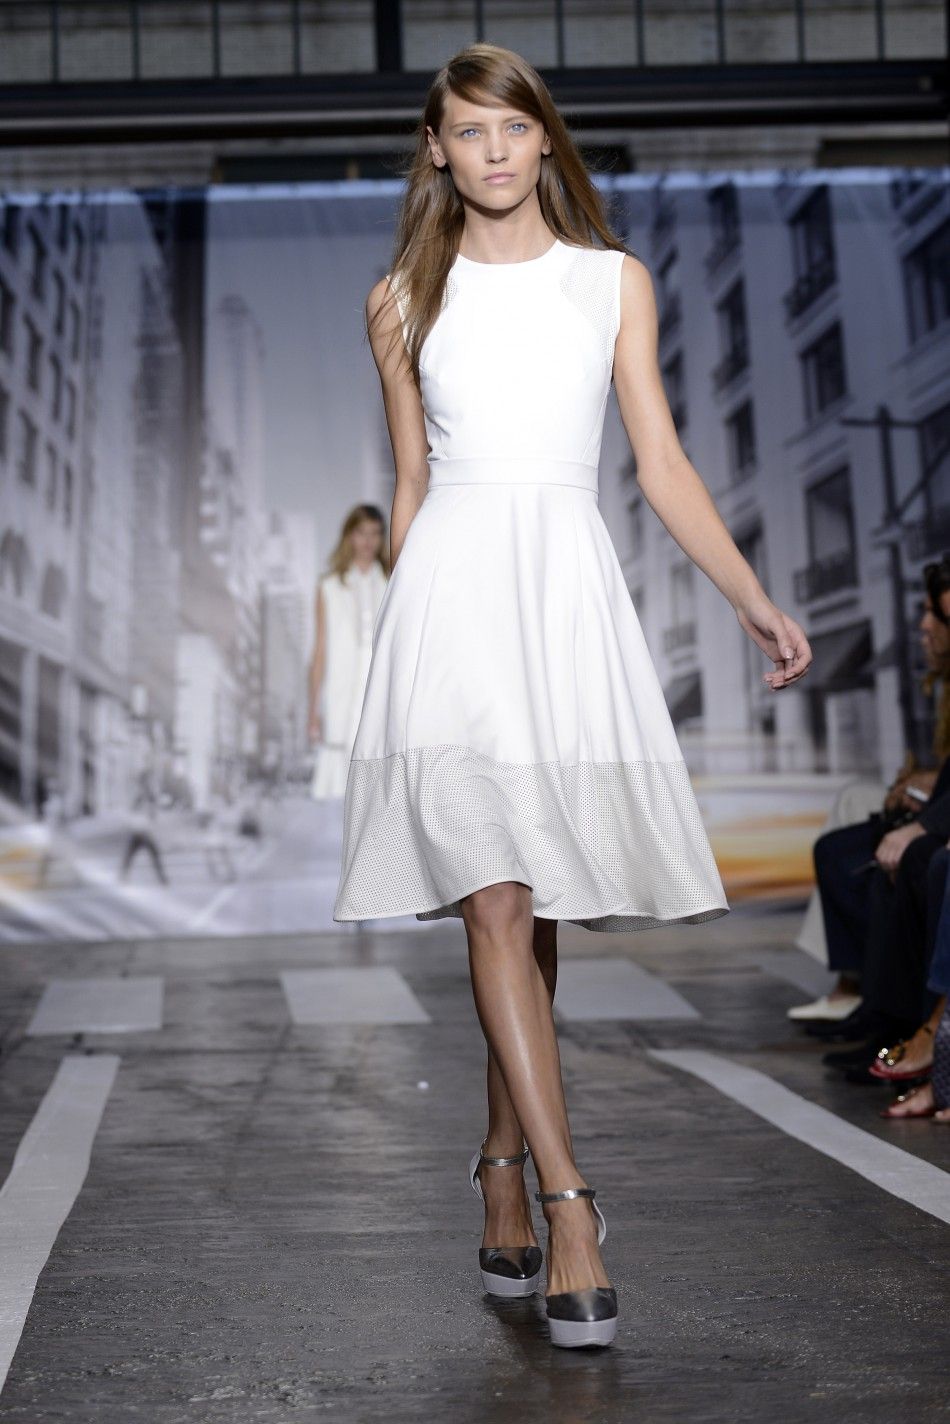 New York Fashion Week: Donna Karan Returns to Her Roots – The